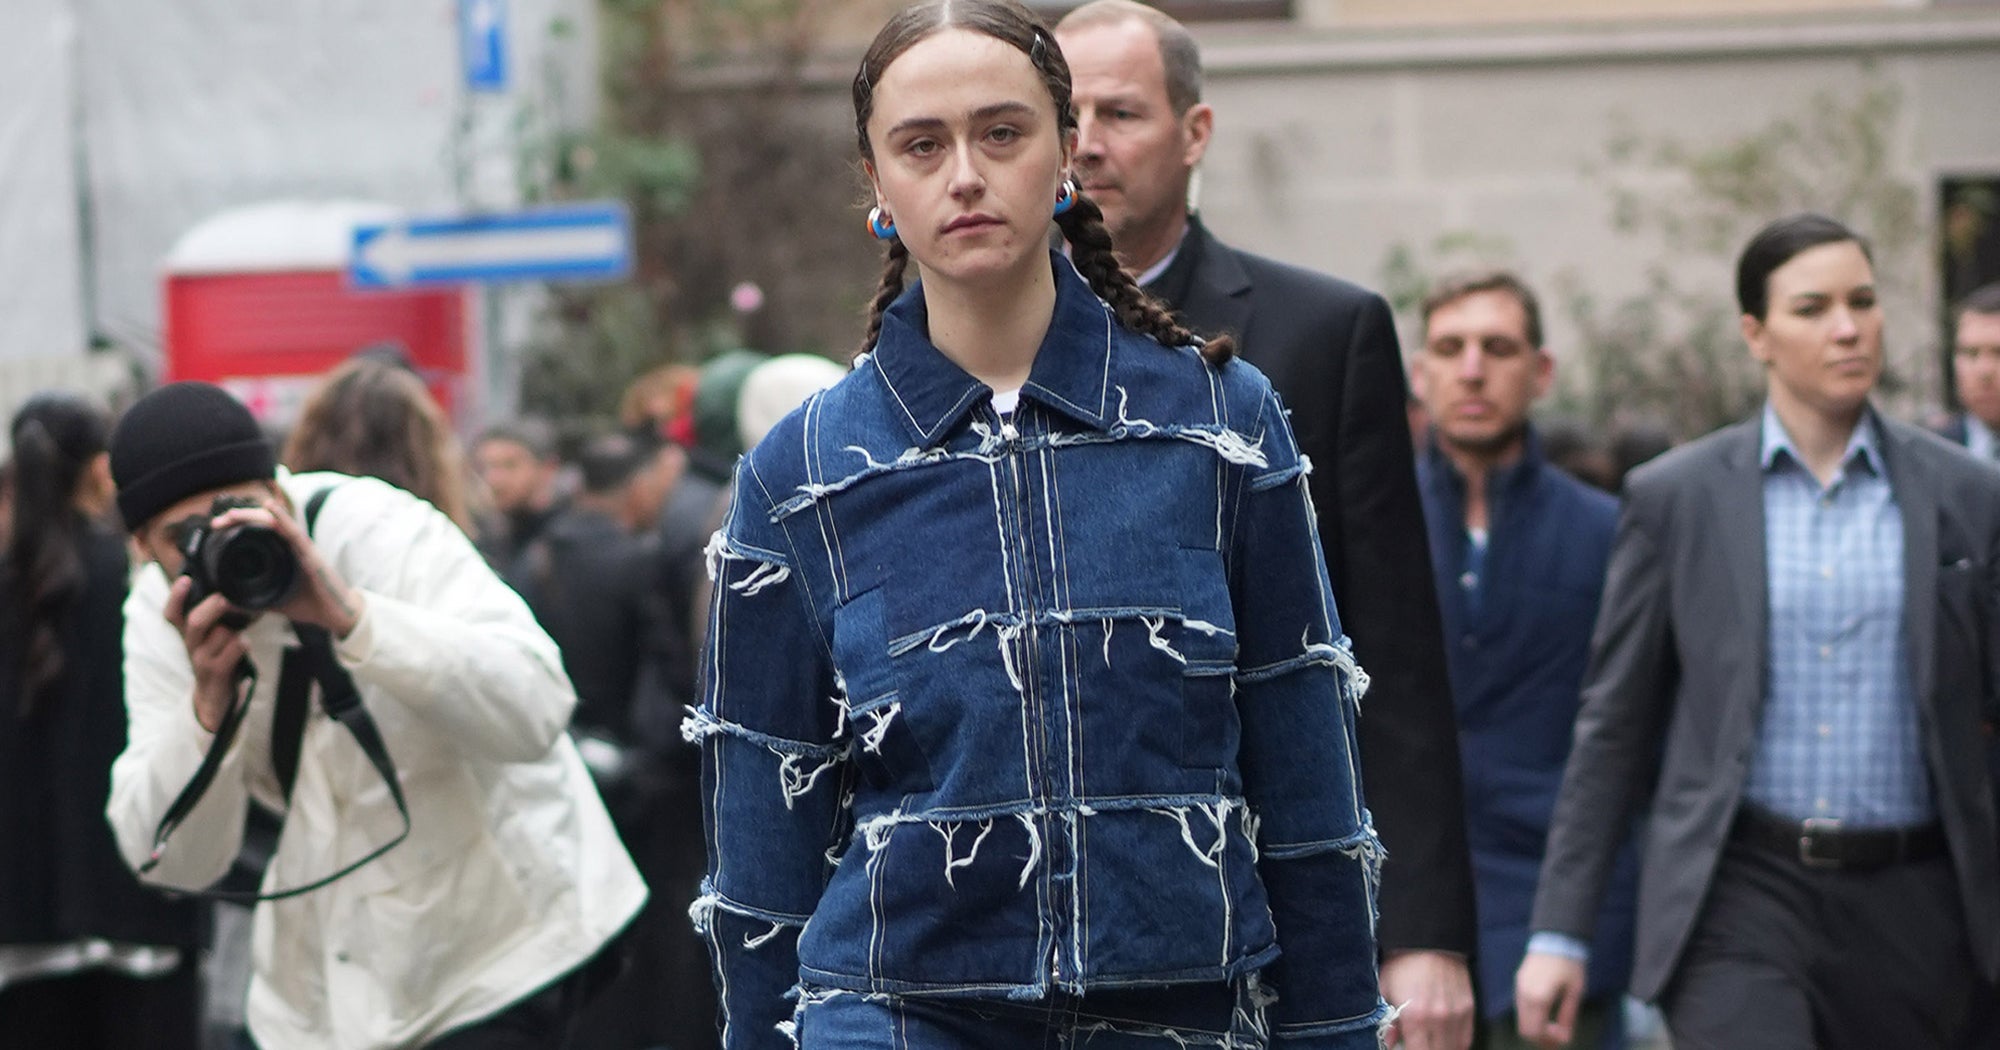 Patchwork Denim Jackets Are Spring’s Top Trend. Here Are 15 To Shop Now